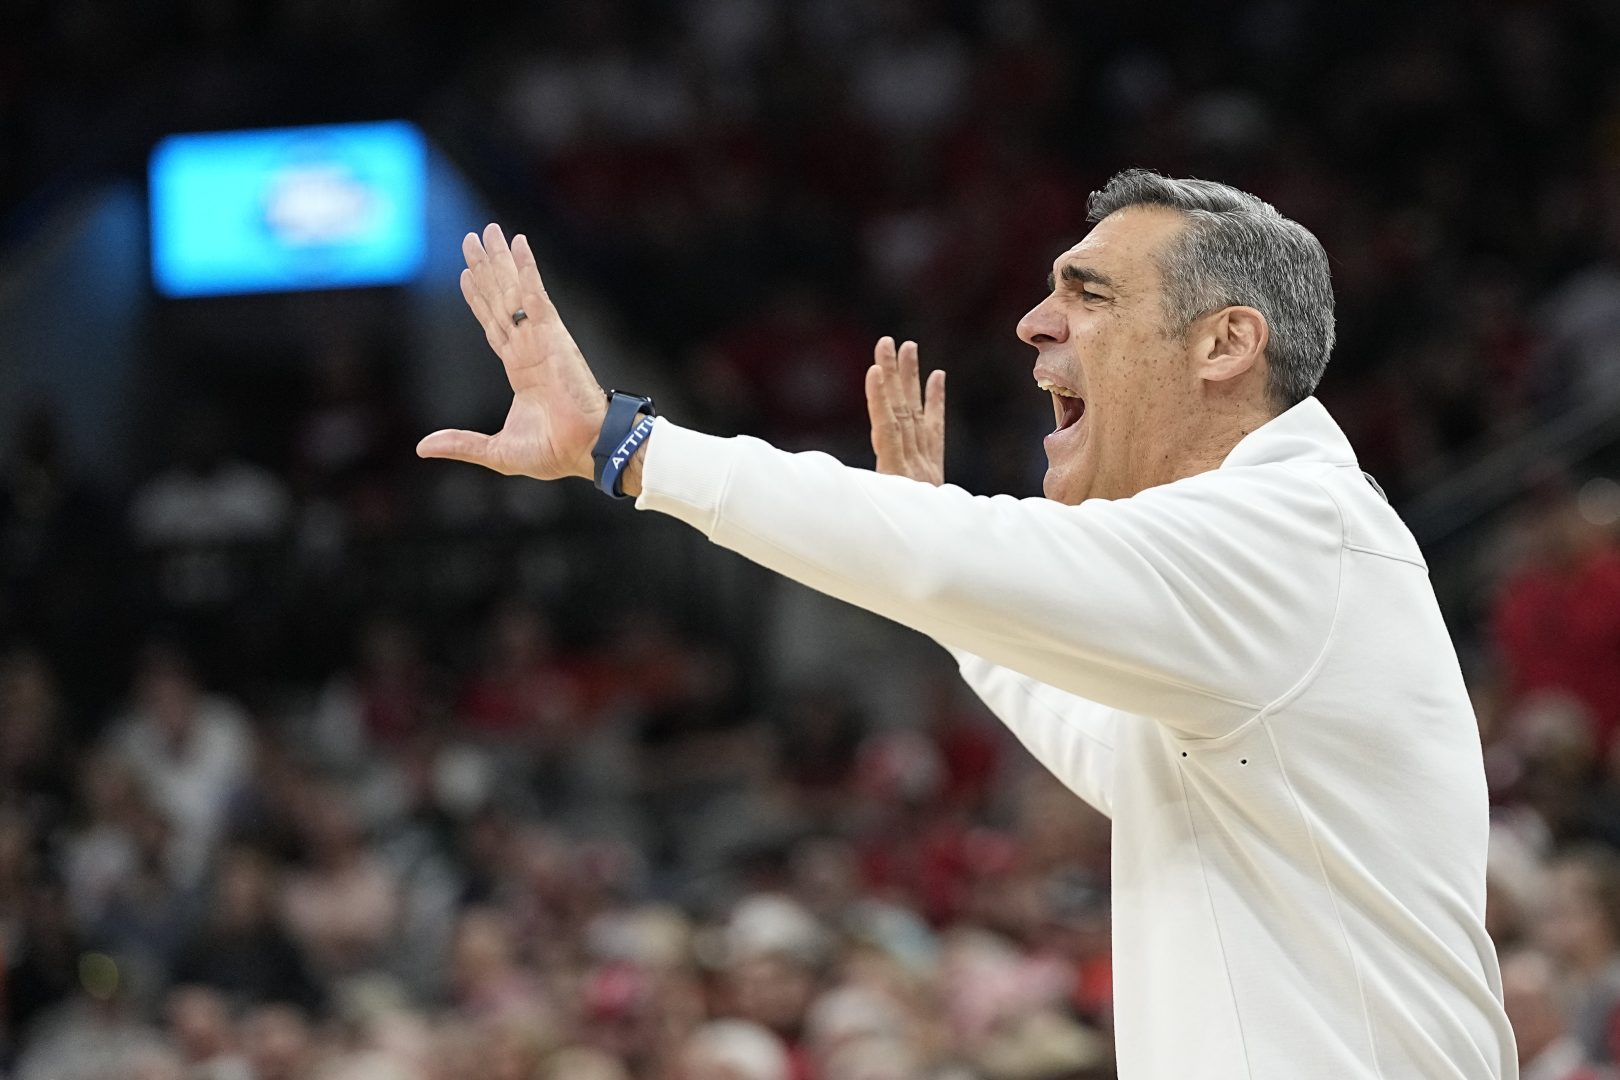 Villanova head coach Jay Wright yells during the first half of a college basketball game against Houston in the Elite Eight round of the NCAA tournament on Saturday, March 26, 2022, in San Antonio. (AP Photo/David J. Phillip)